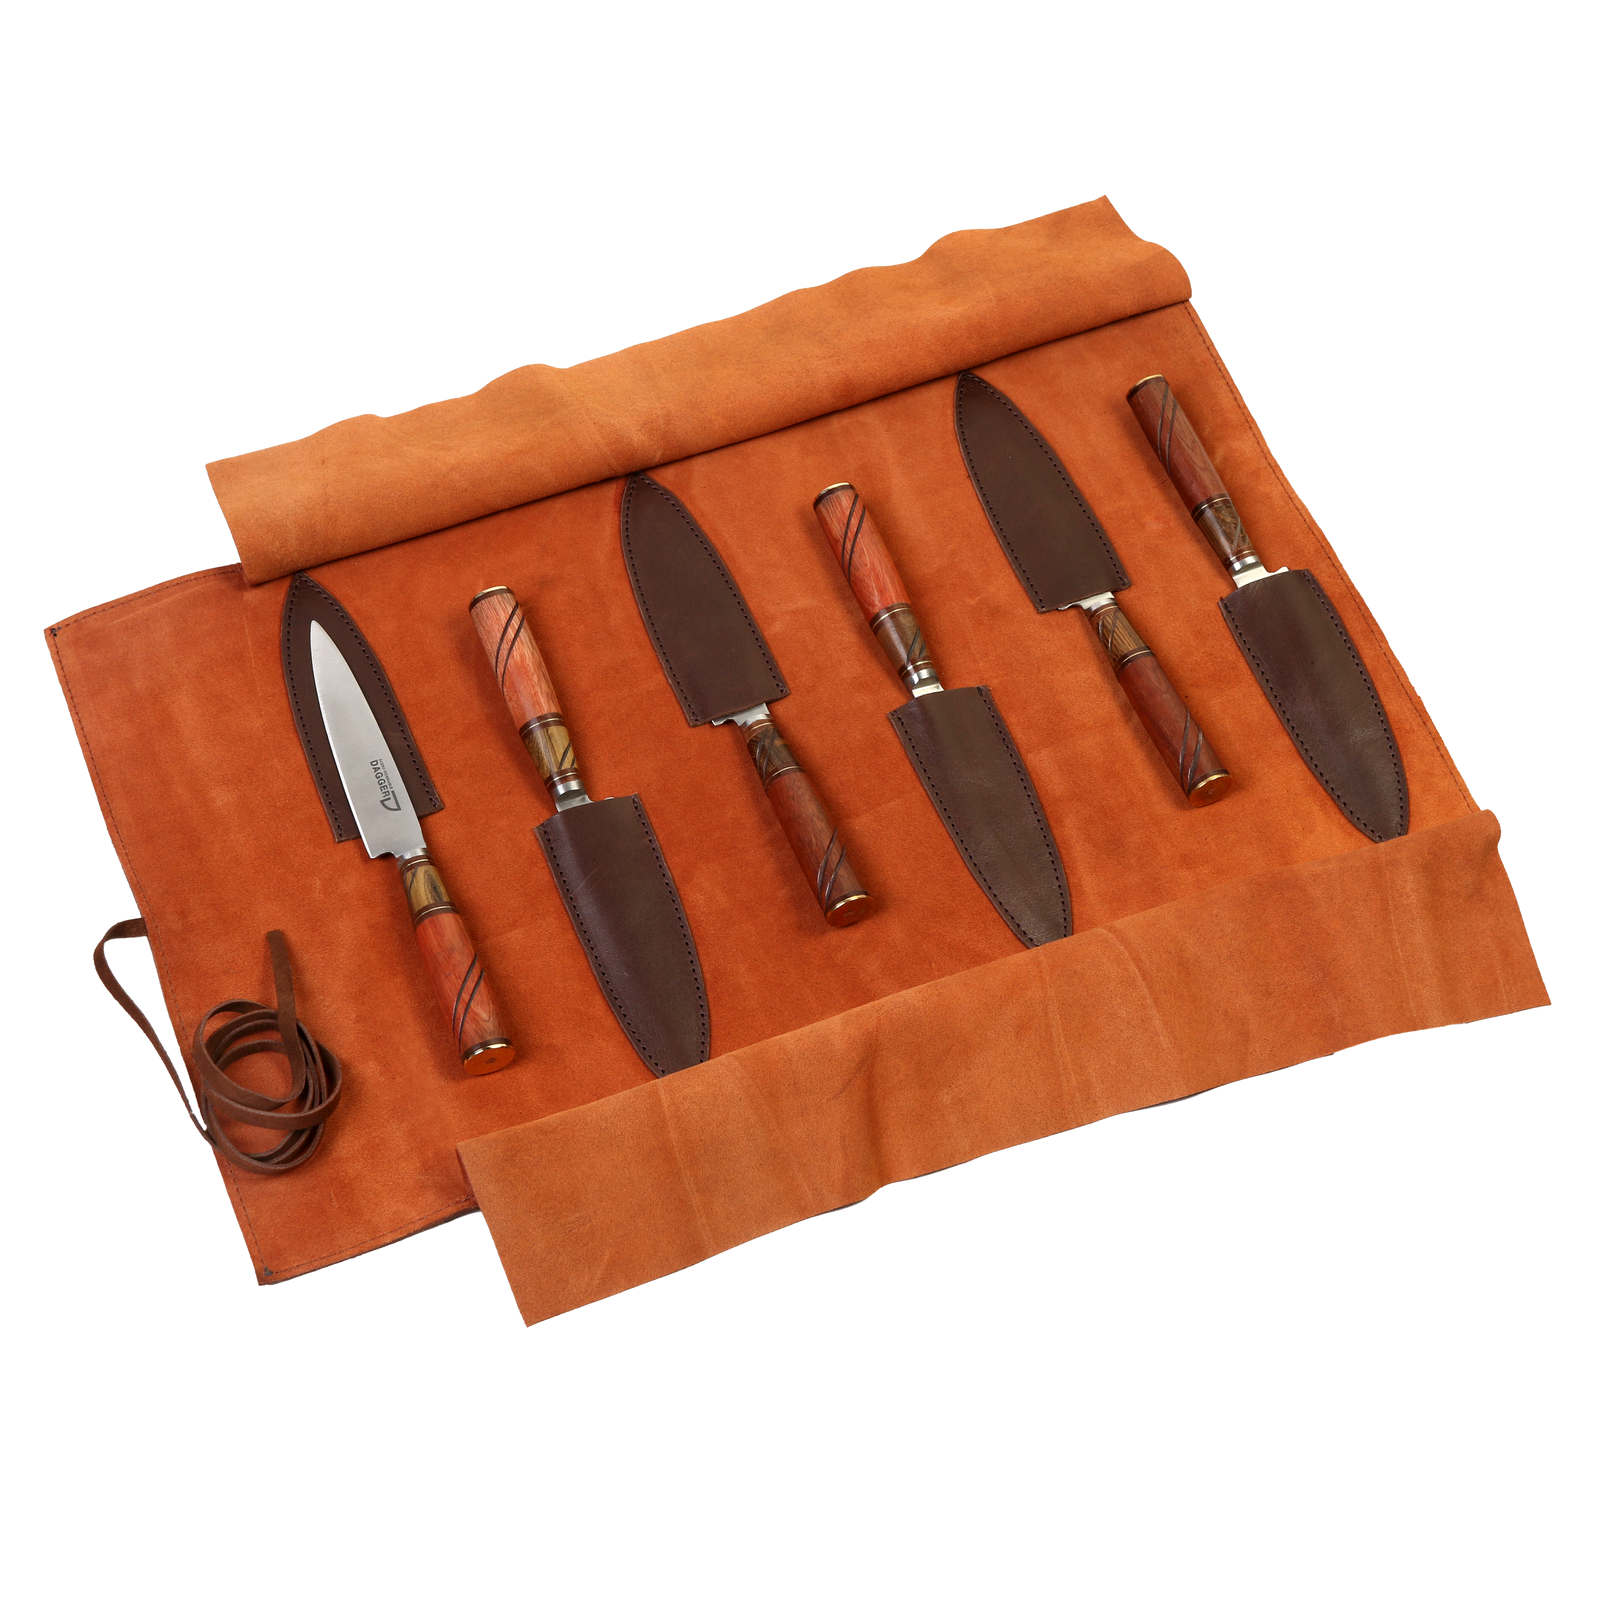 6 Knife Cutlery Set with Combined Wood Handles